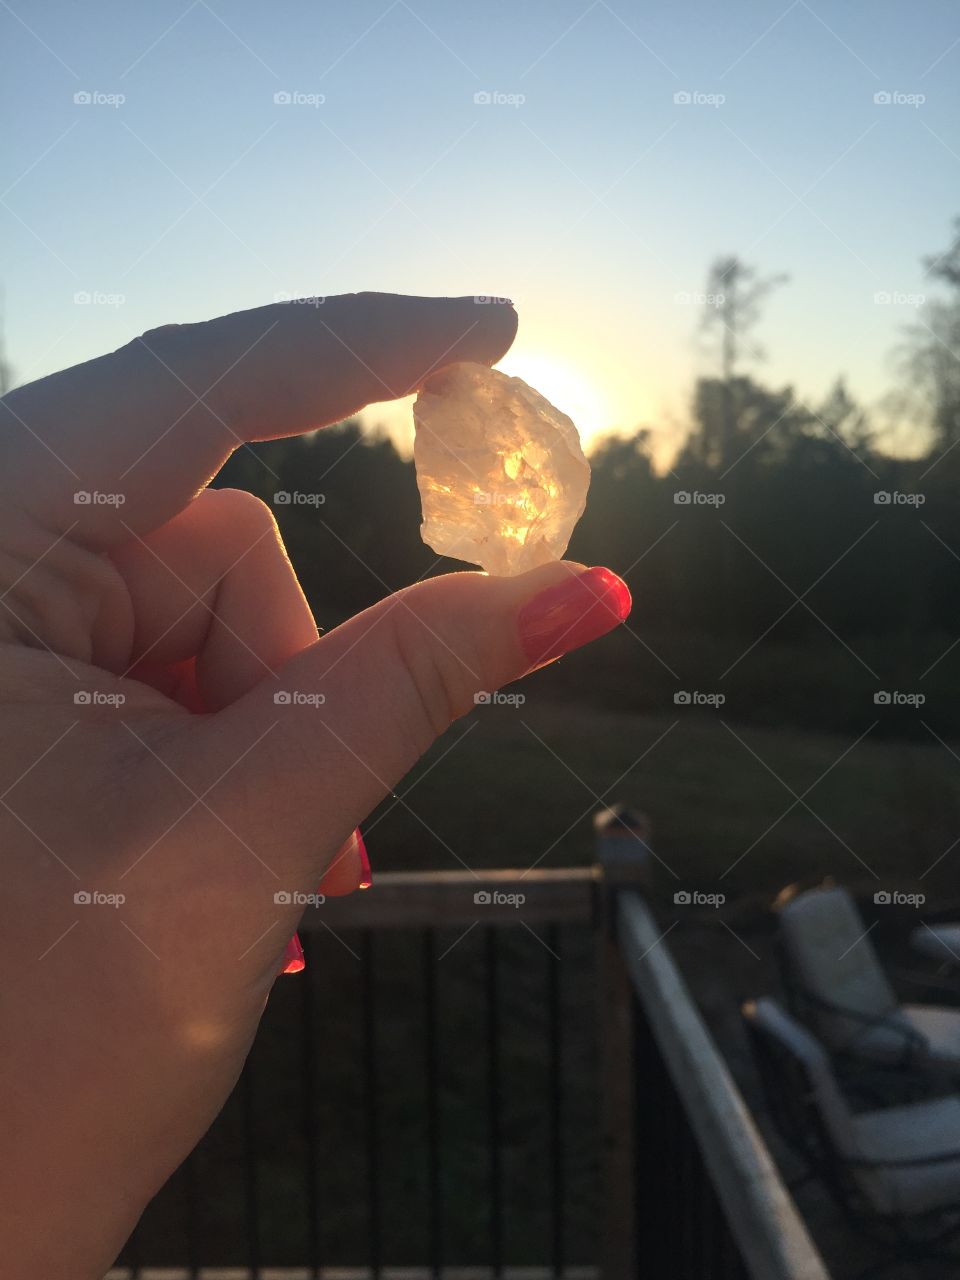 Gemstone in front of the sun